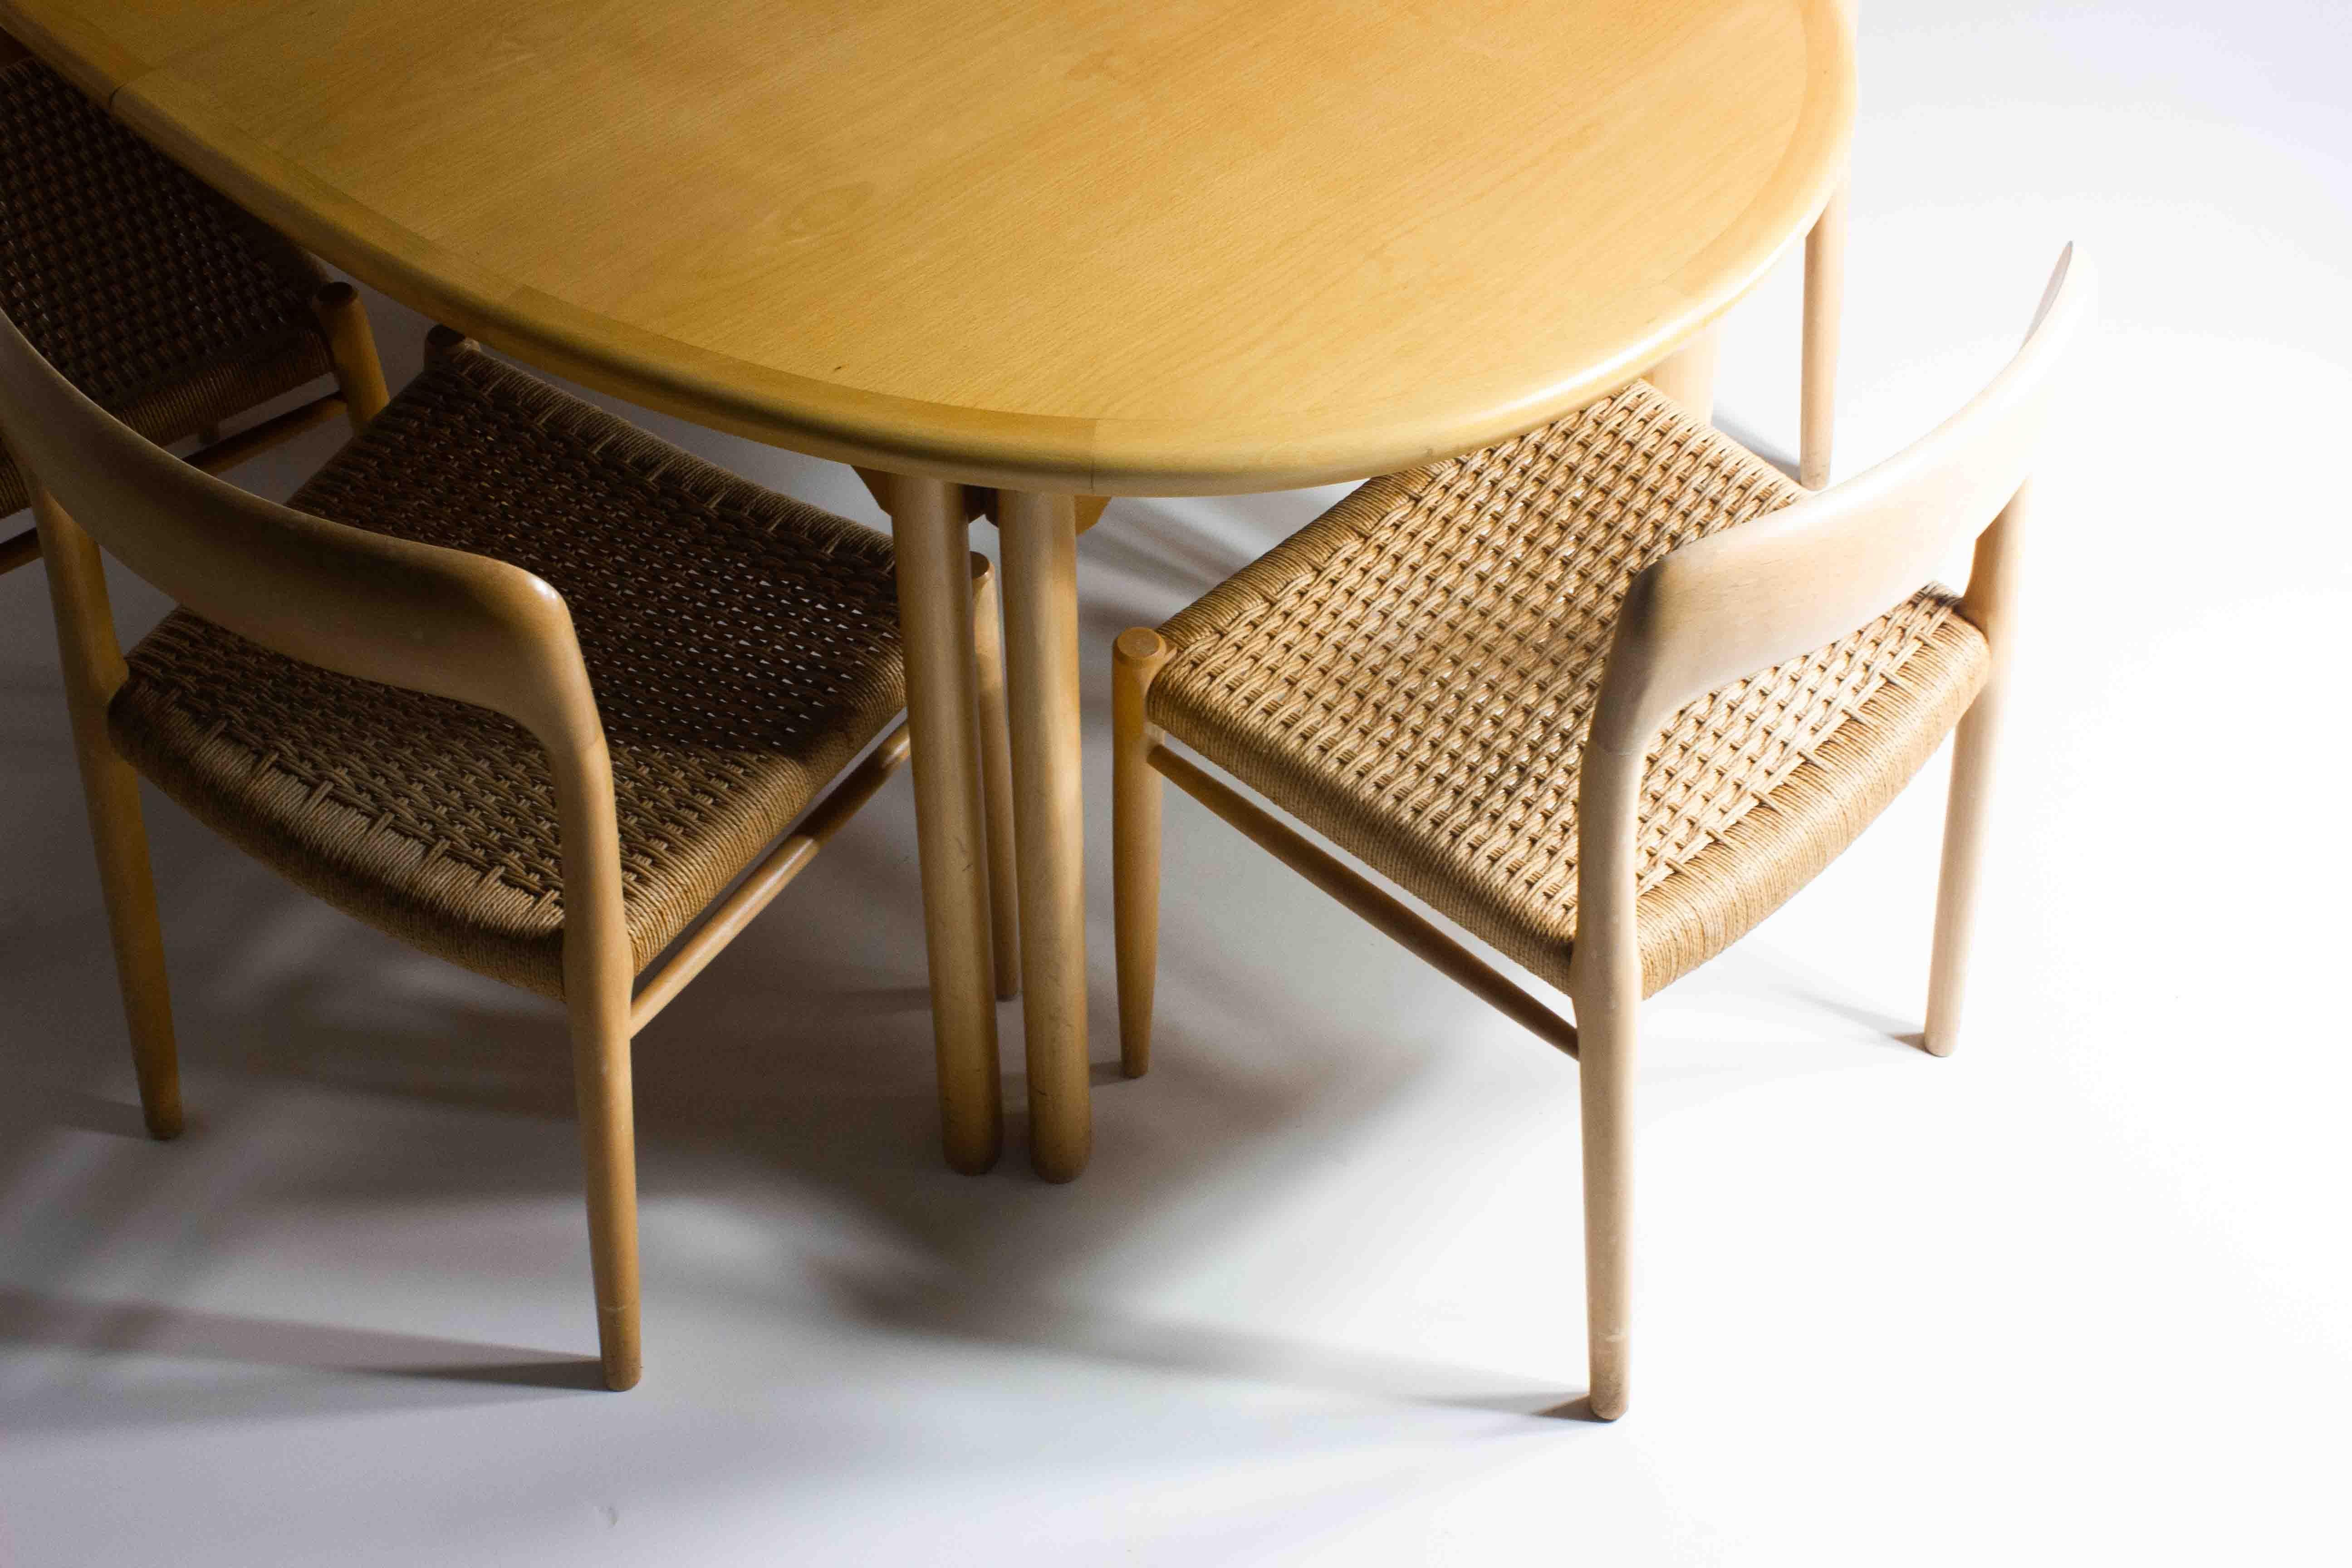 The model 75 chair series, conceived in the vibrant era of the sixties, stands as a testament to Niels Otto Møller’s enduring legacy. Crafted with the finest solid oak and intricately woven paper-cord seats, each piece in this collection of six